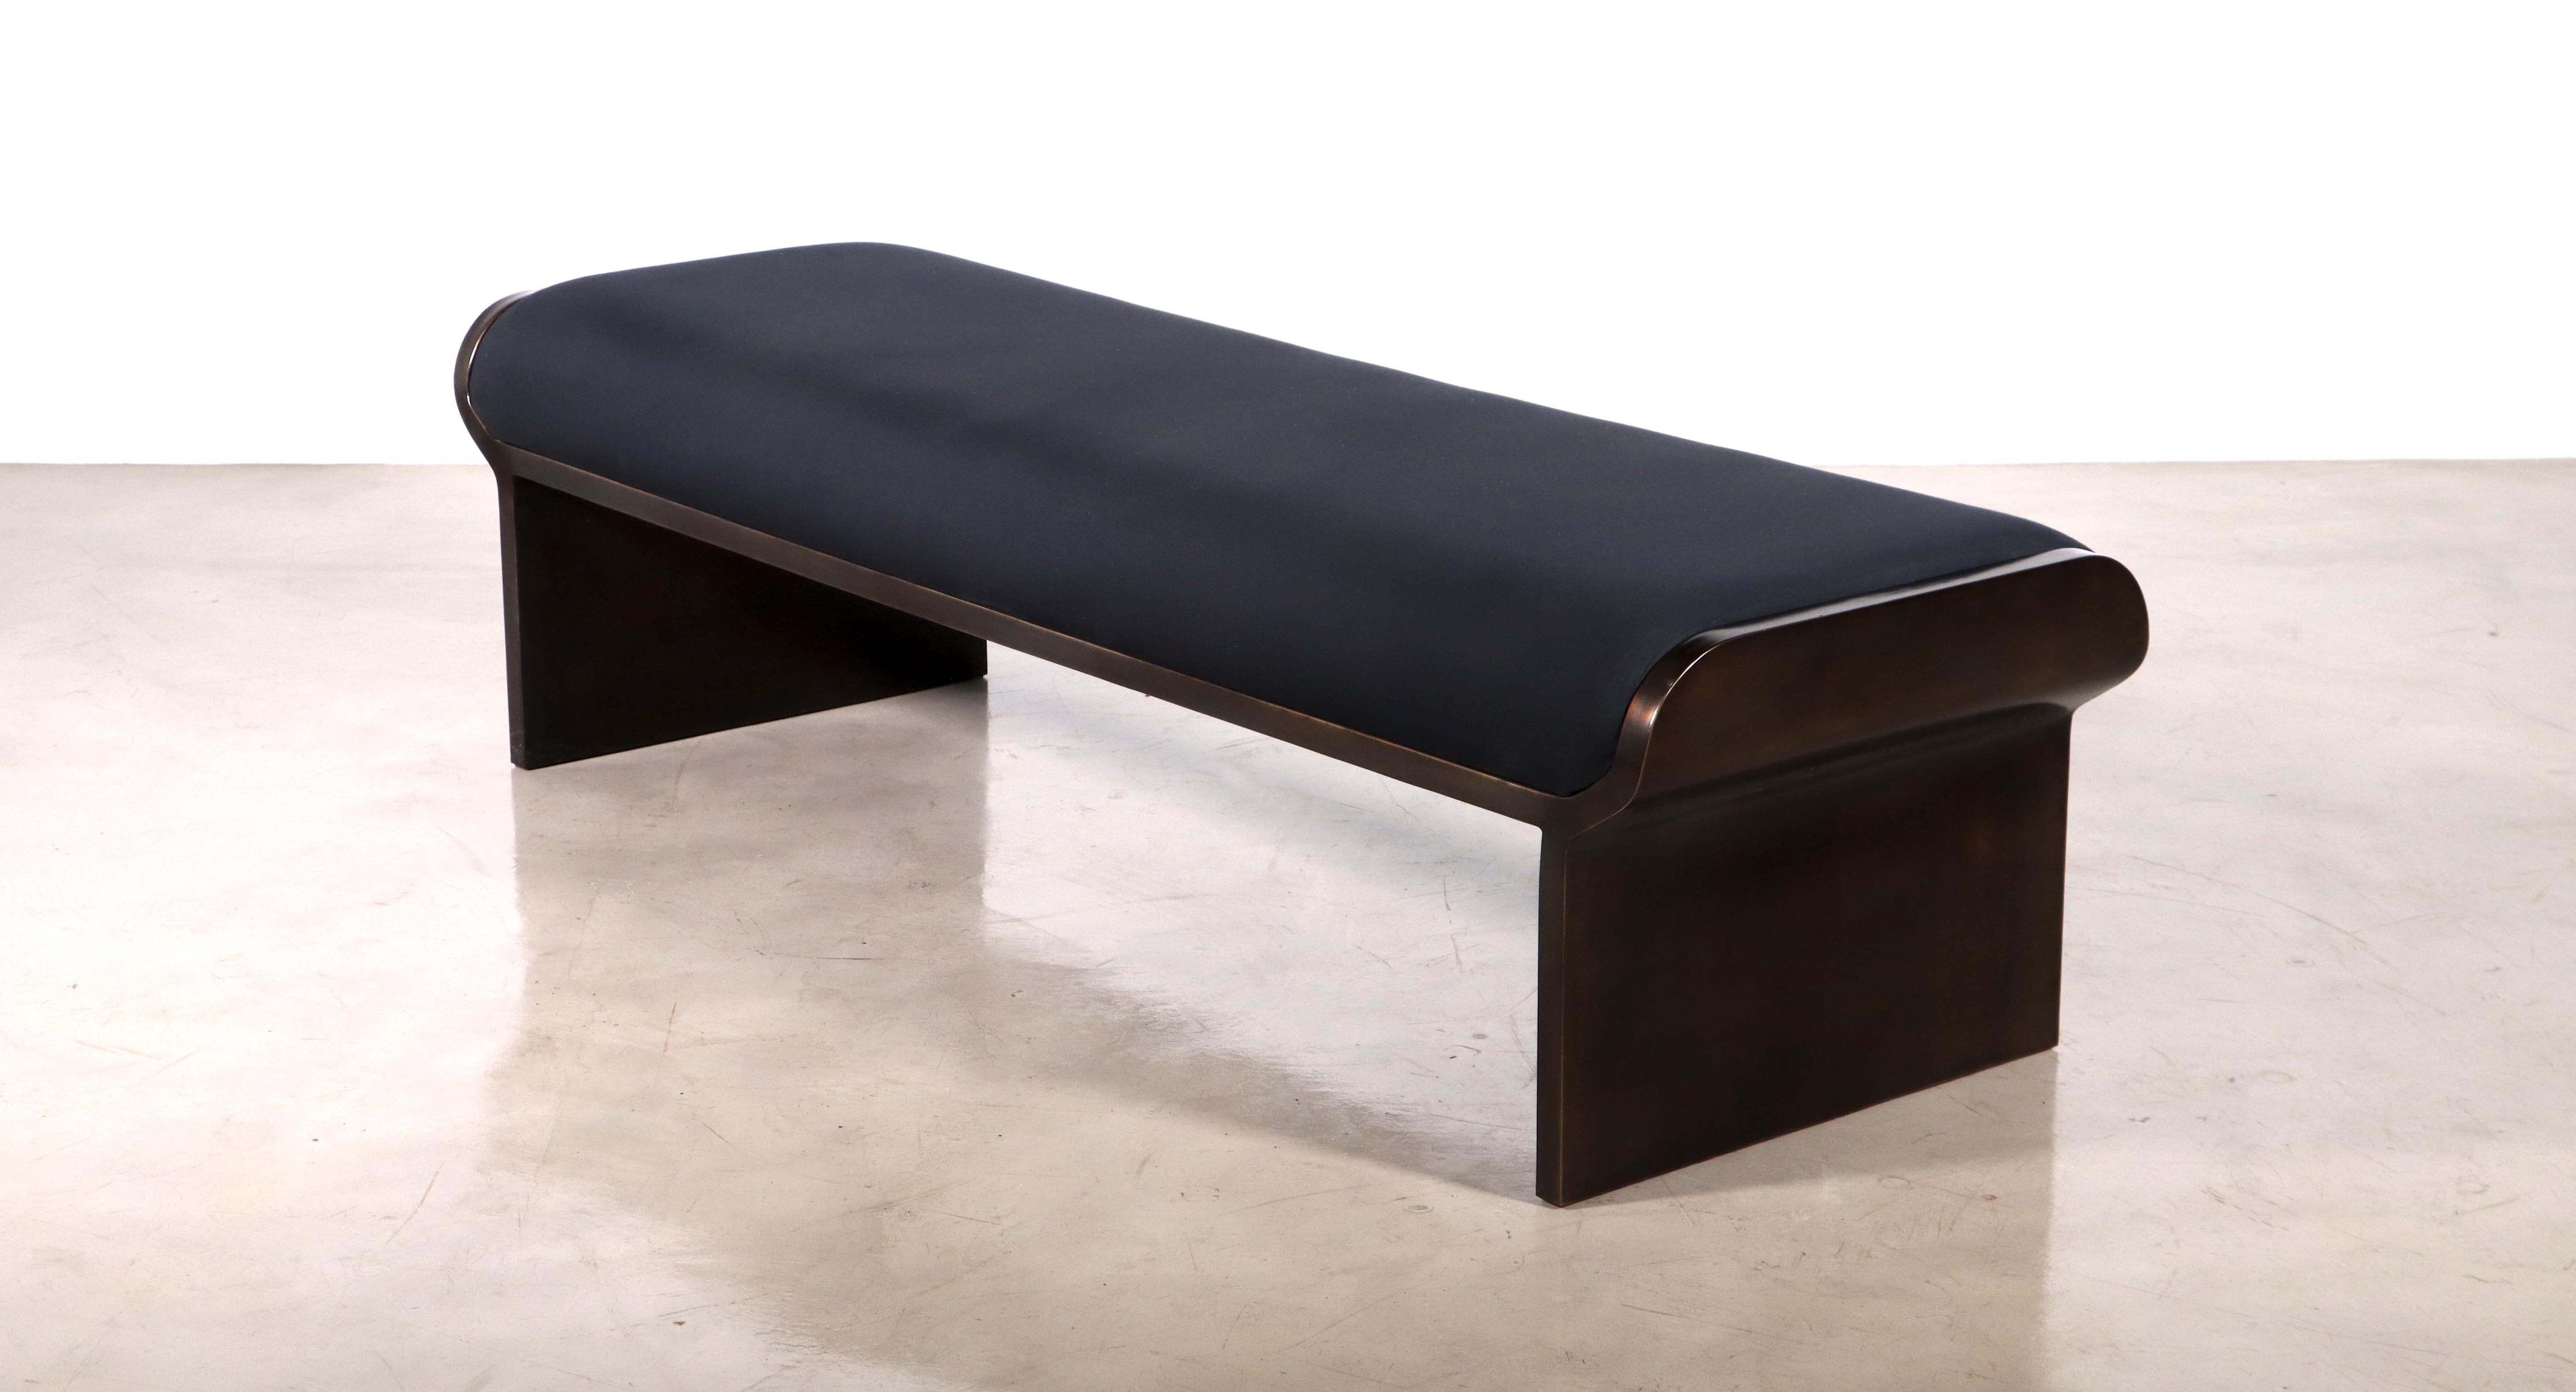 The Elia Bench by Costantini features a metal frame and upholstered seat.  Available as shown or in custom sizes and shapes and the fabric or leather of your choice. Additionally, the bench can be made in steel, iron, or lacquered or powder coated